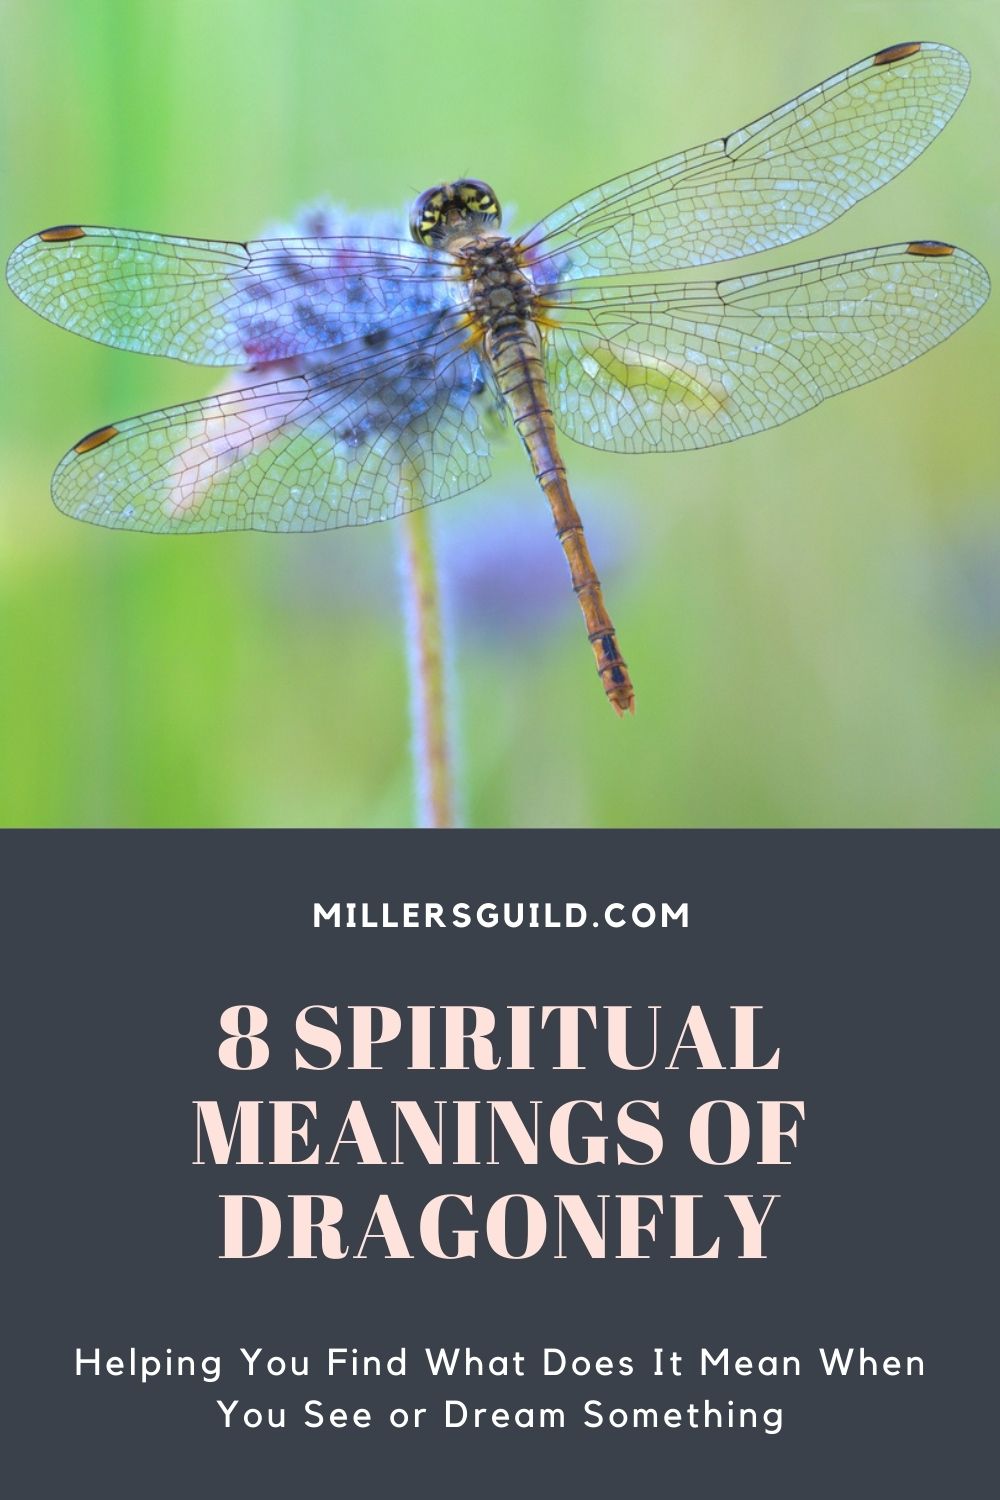 8 Spiritual Meanings of Dragonfly 2